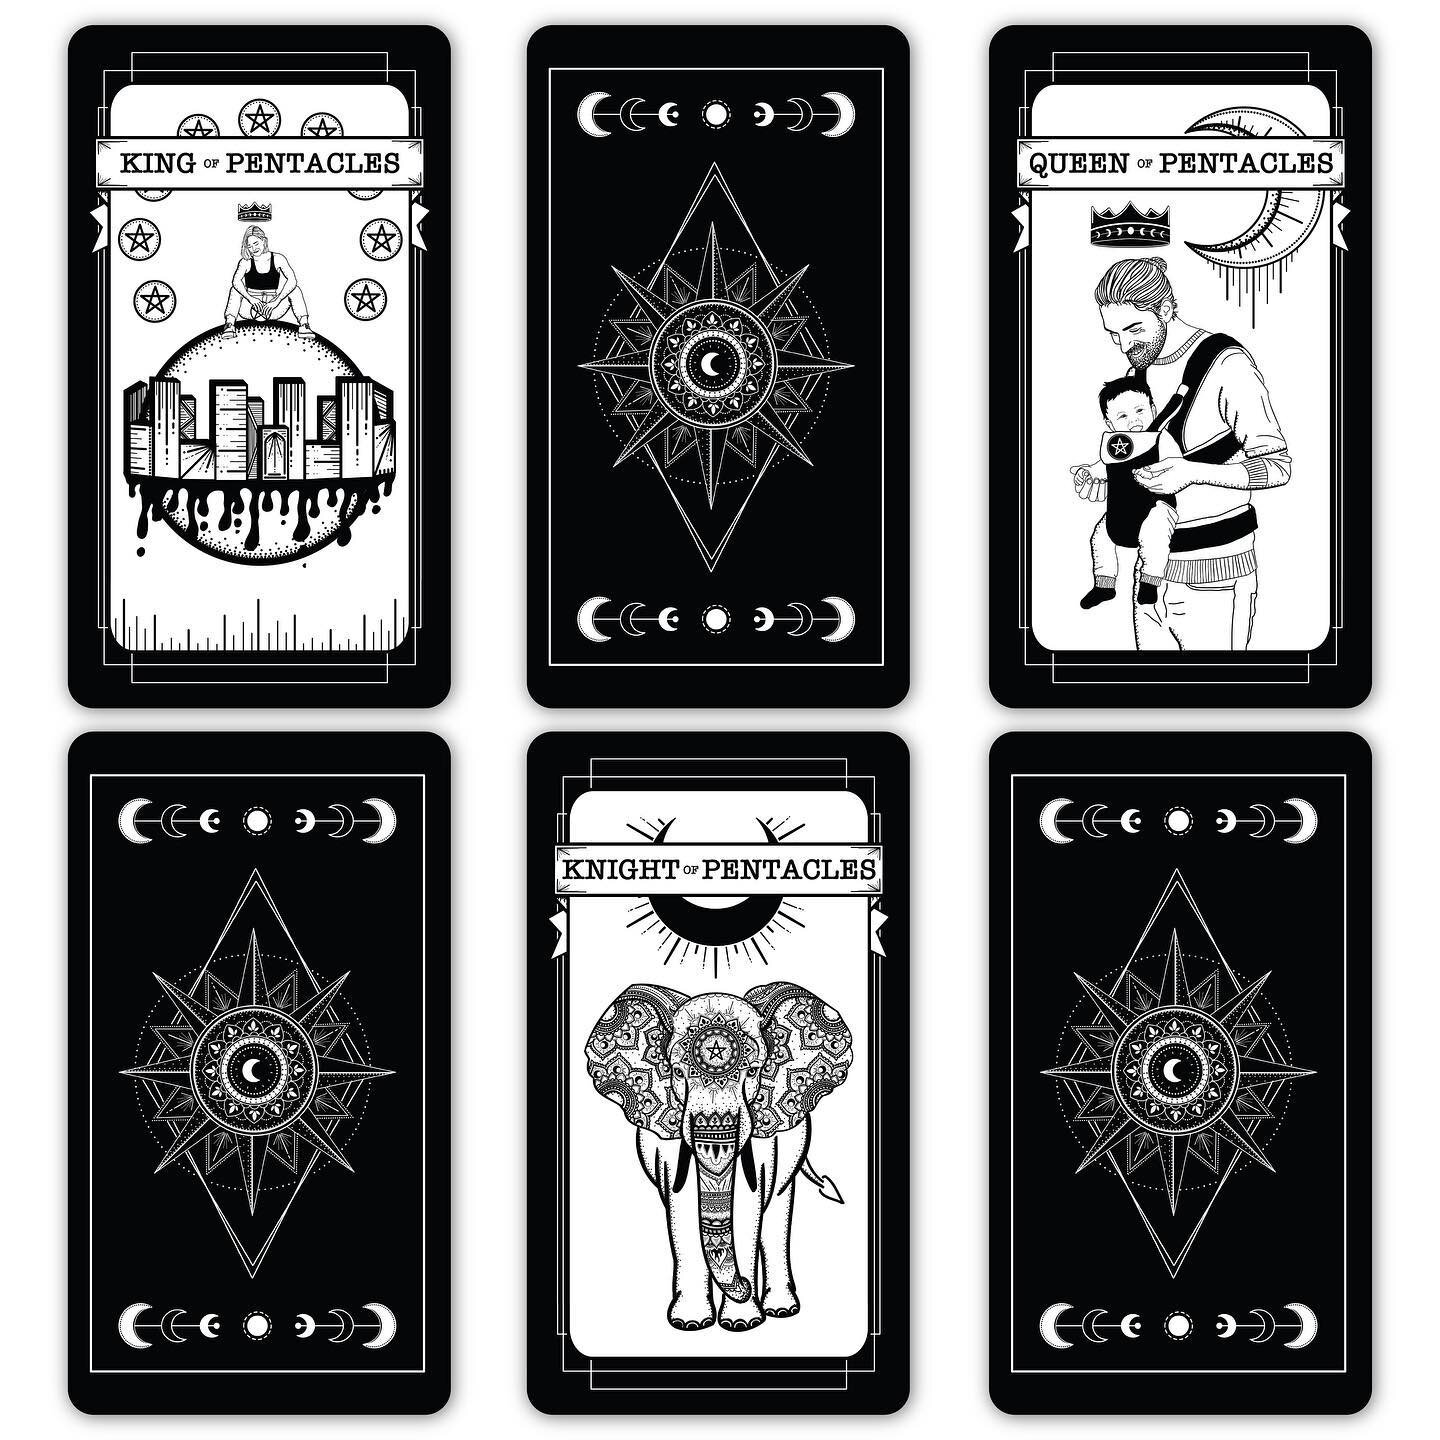 &bull;Court Cards&bull;
In The #QueerWitchTarodDeck , many of the Court Cards aren&rsquo;t gendered (or aren&rsquo;t traditionally gendered). Removing traditional gender roles from the court cards allows us to interpret their meanings more holistical